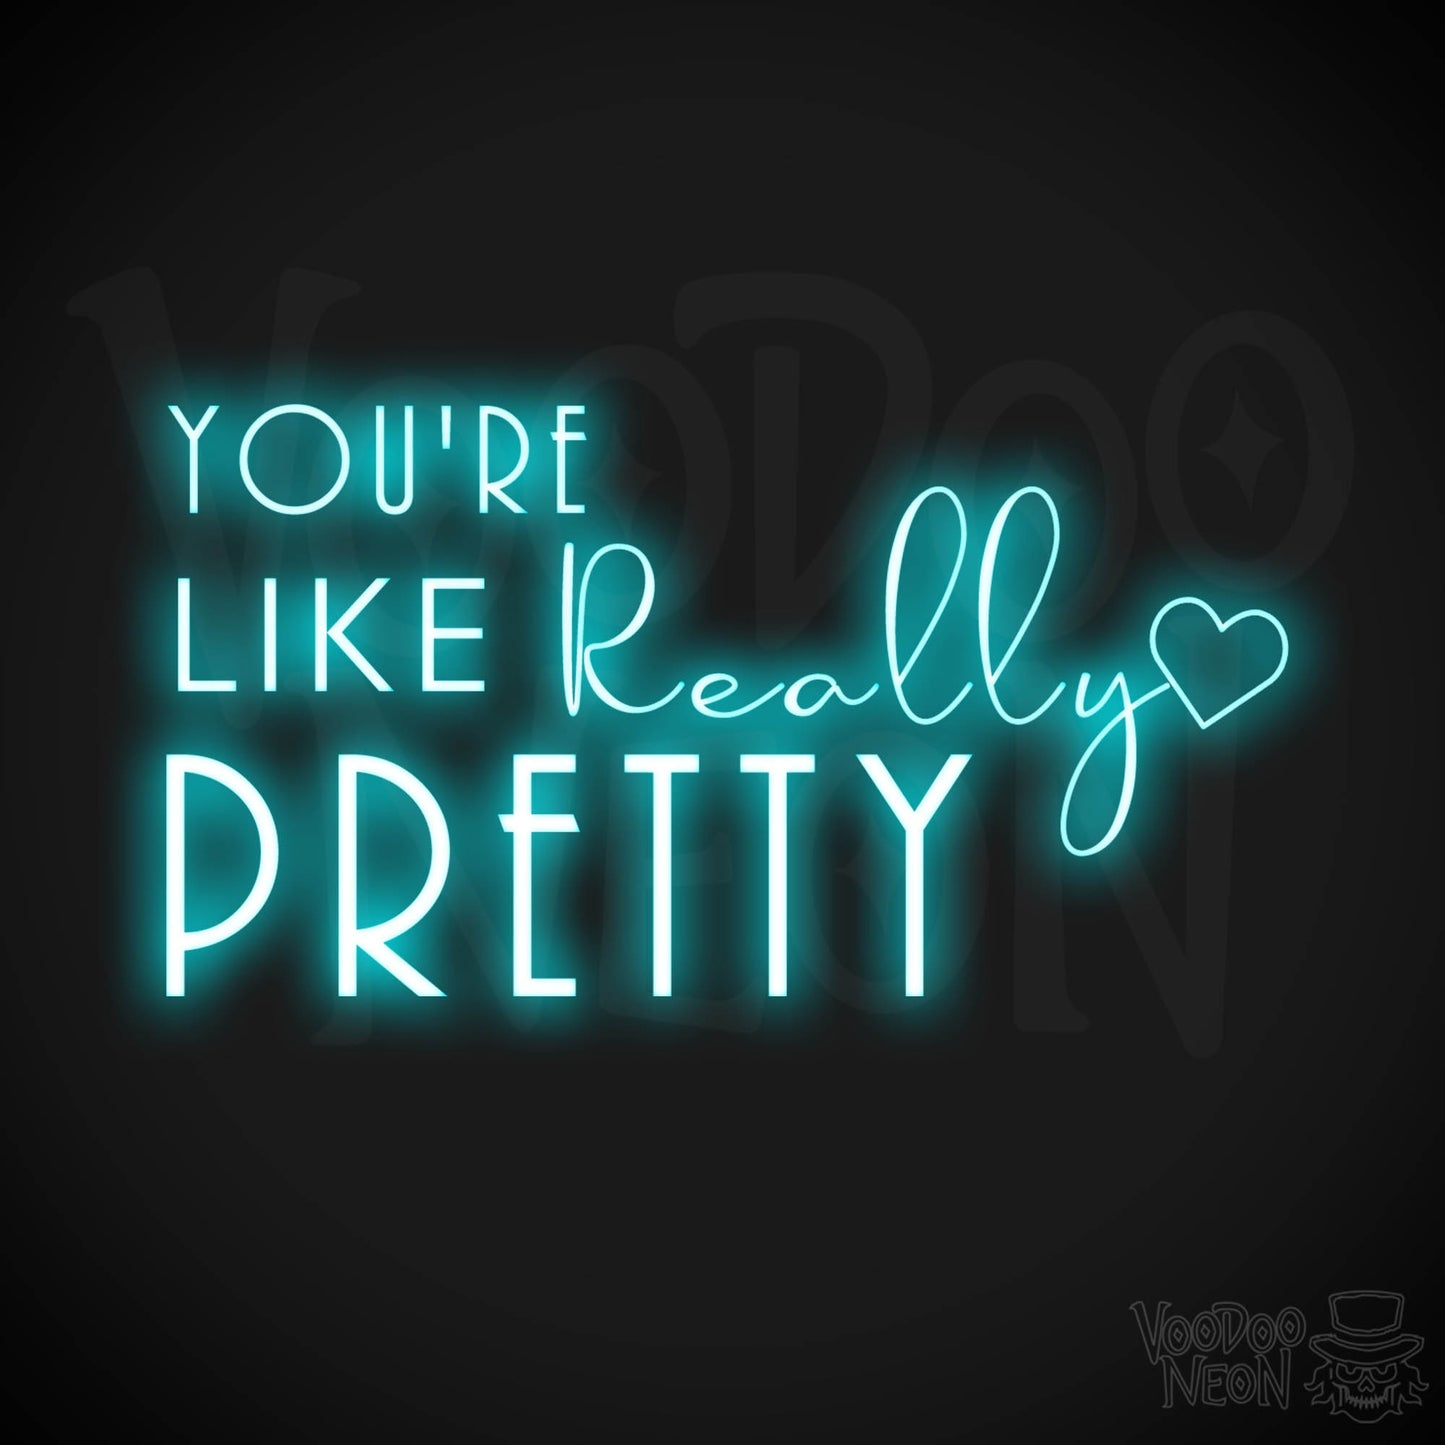 You're Like Really Pretty Neon Sign - Neon You're Like Really Pretty Sign - LED Wall Art - Color Ice Blue